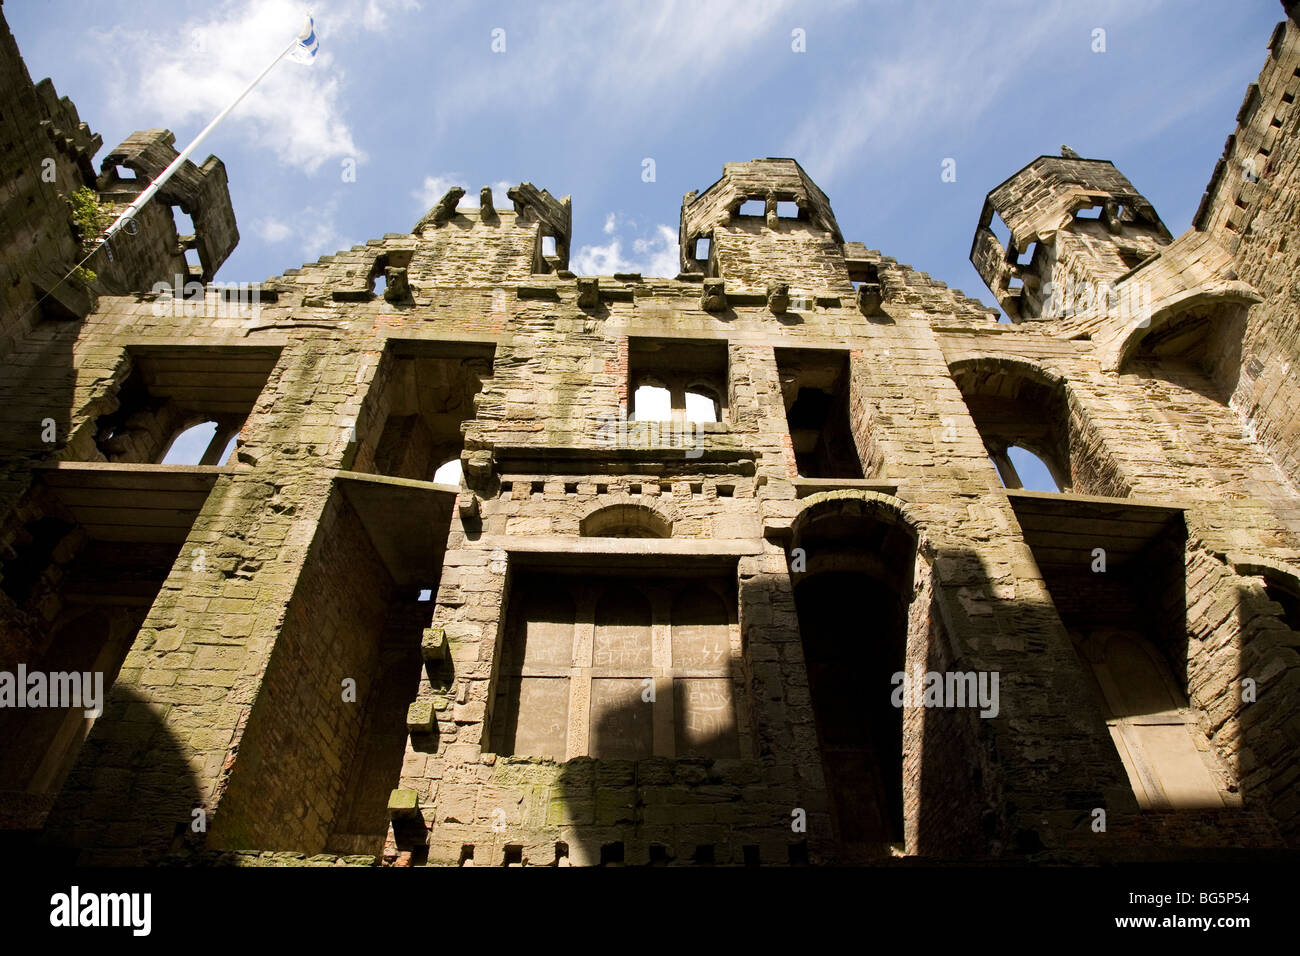 Looking up at the walls of the ruins of Hylton Castle in Sunderland, England. Stock Photo